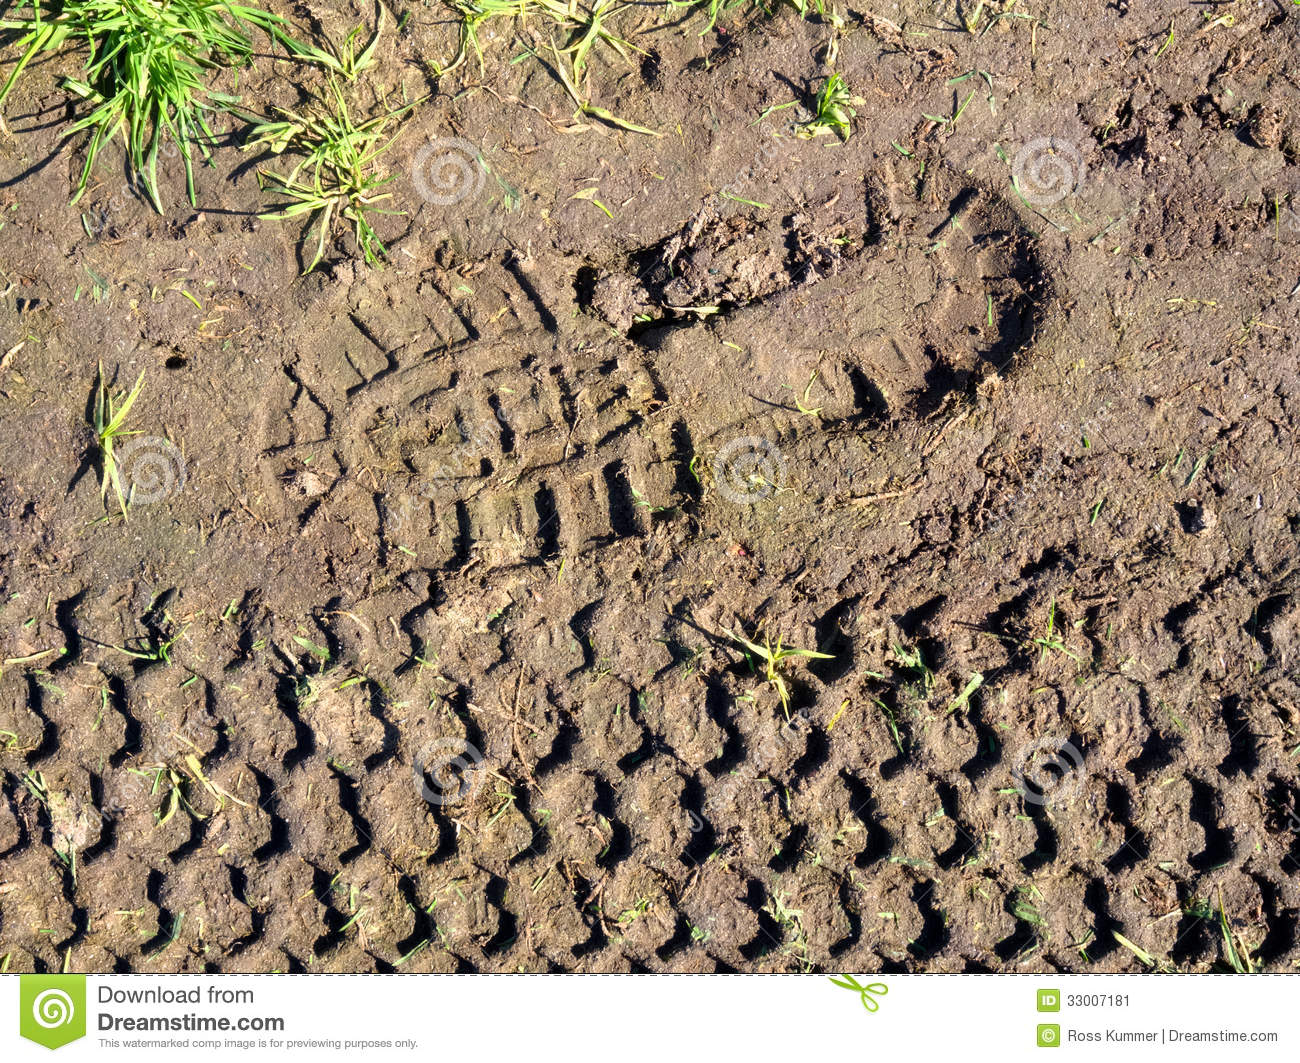 Footprint And Tyre Print Stock Image   Image  33007181